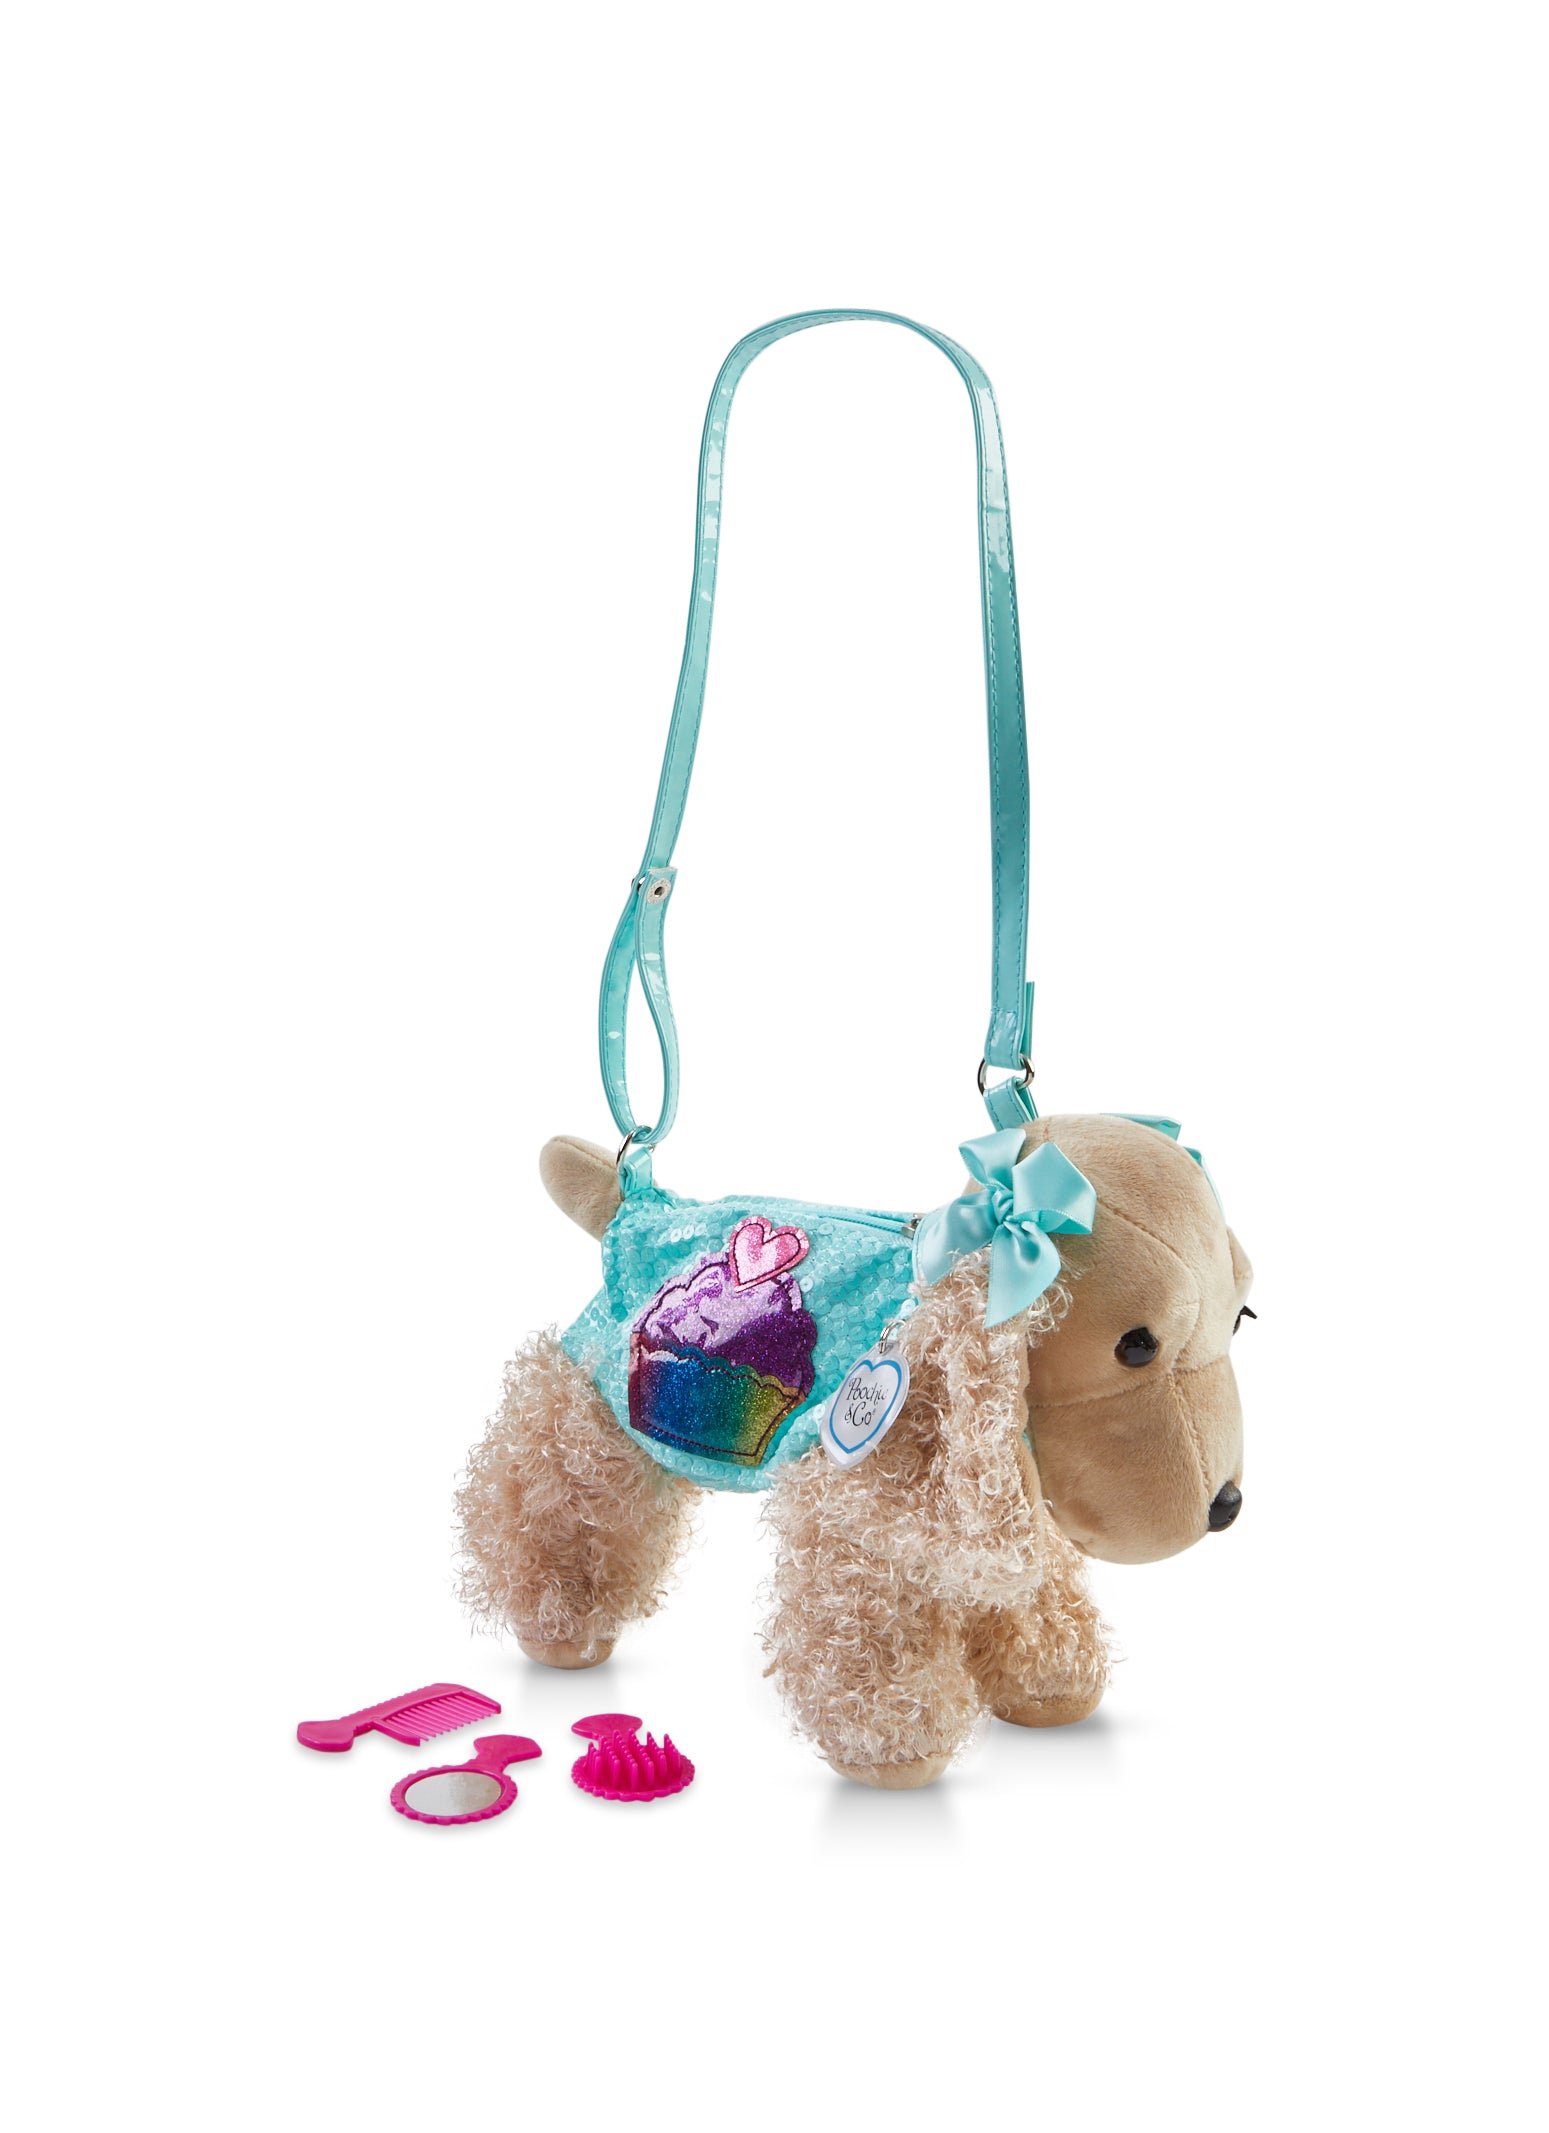 Buy THE MODERN TREND Gclass-Dog Purse for Girls Birthday Gift (B&Y-Dog Soft  Toys Side Bag Small Girls) Online at Low Prices in India - Amazon.in